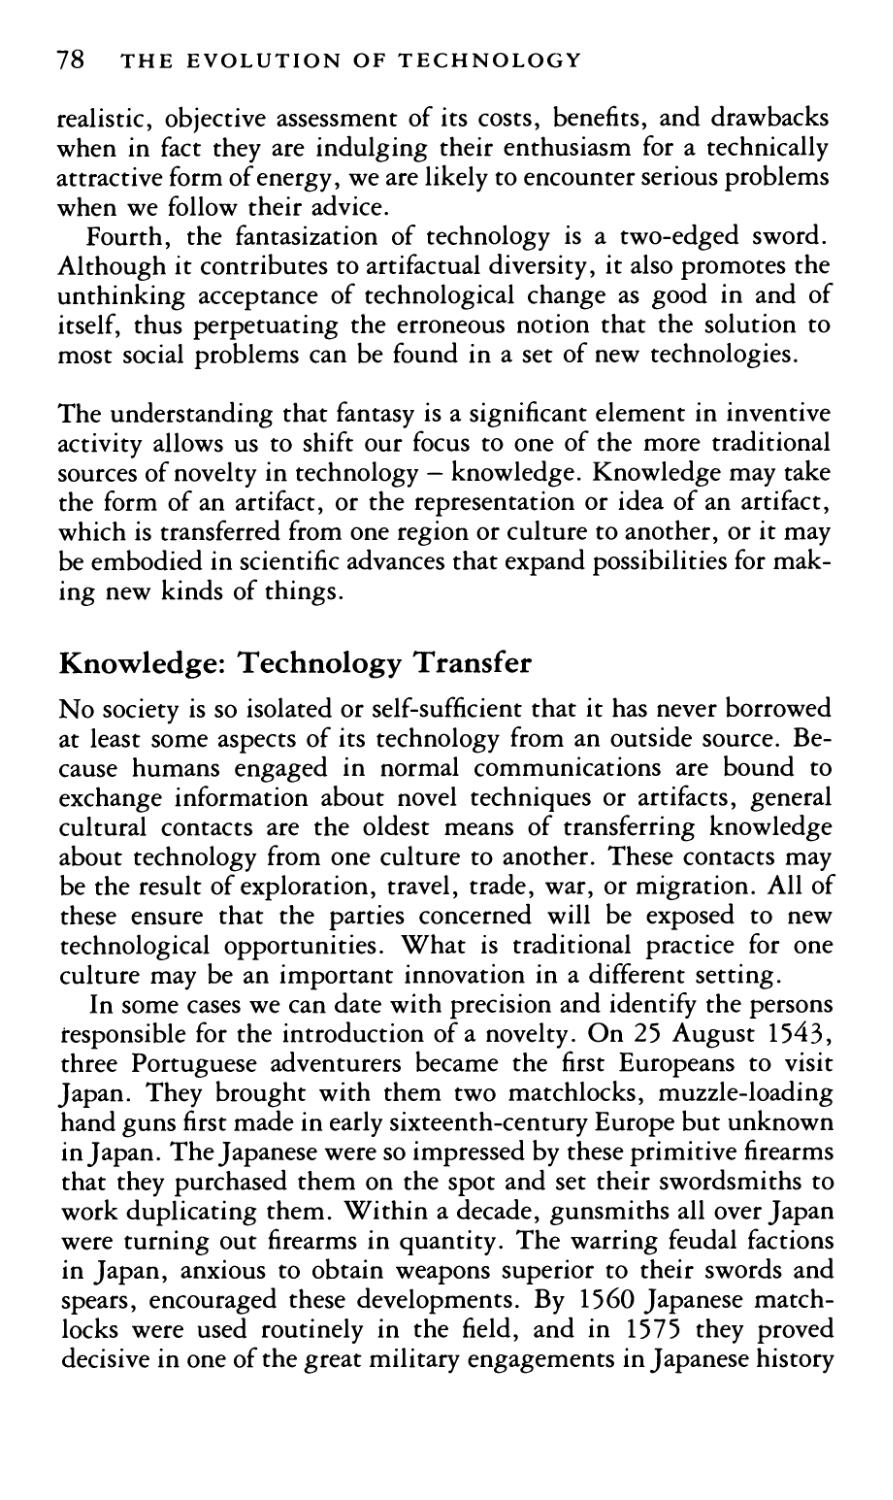 Knowledge: Technology Transfer